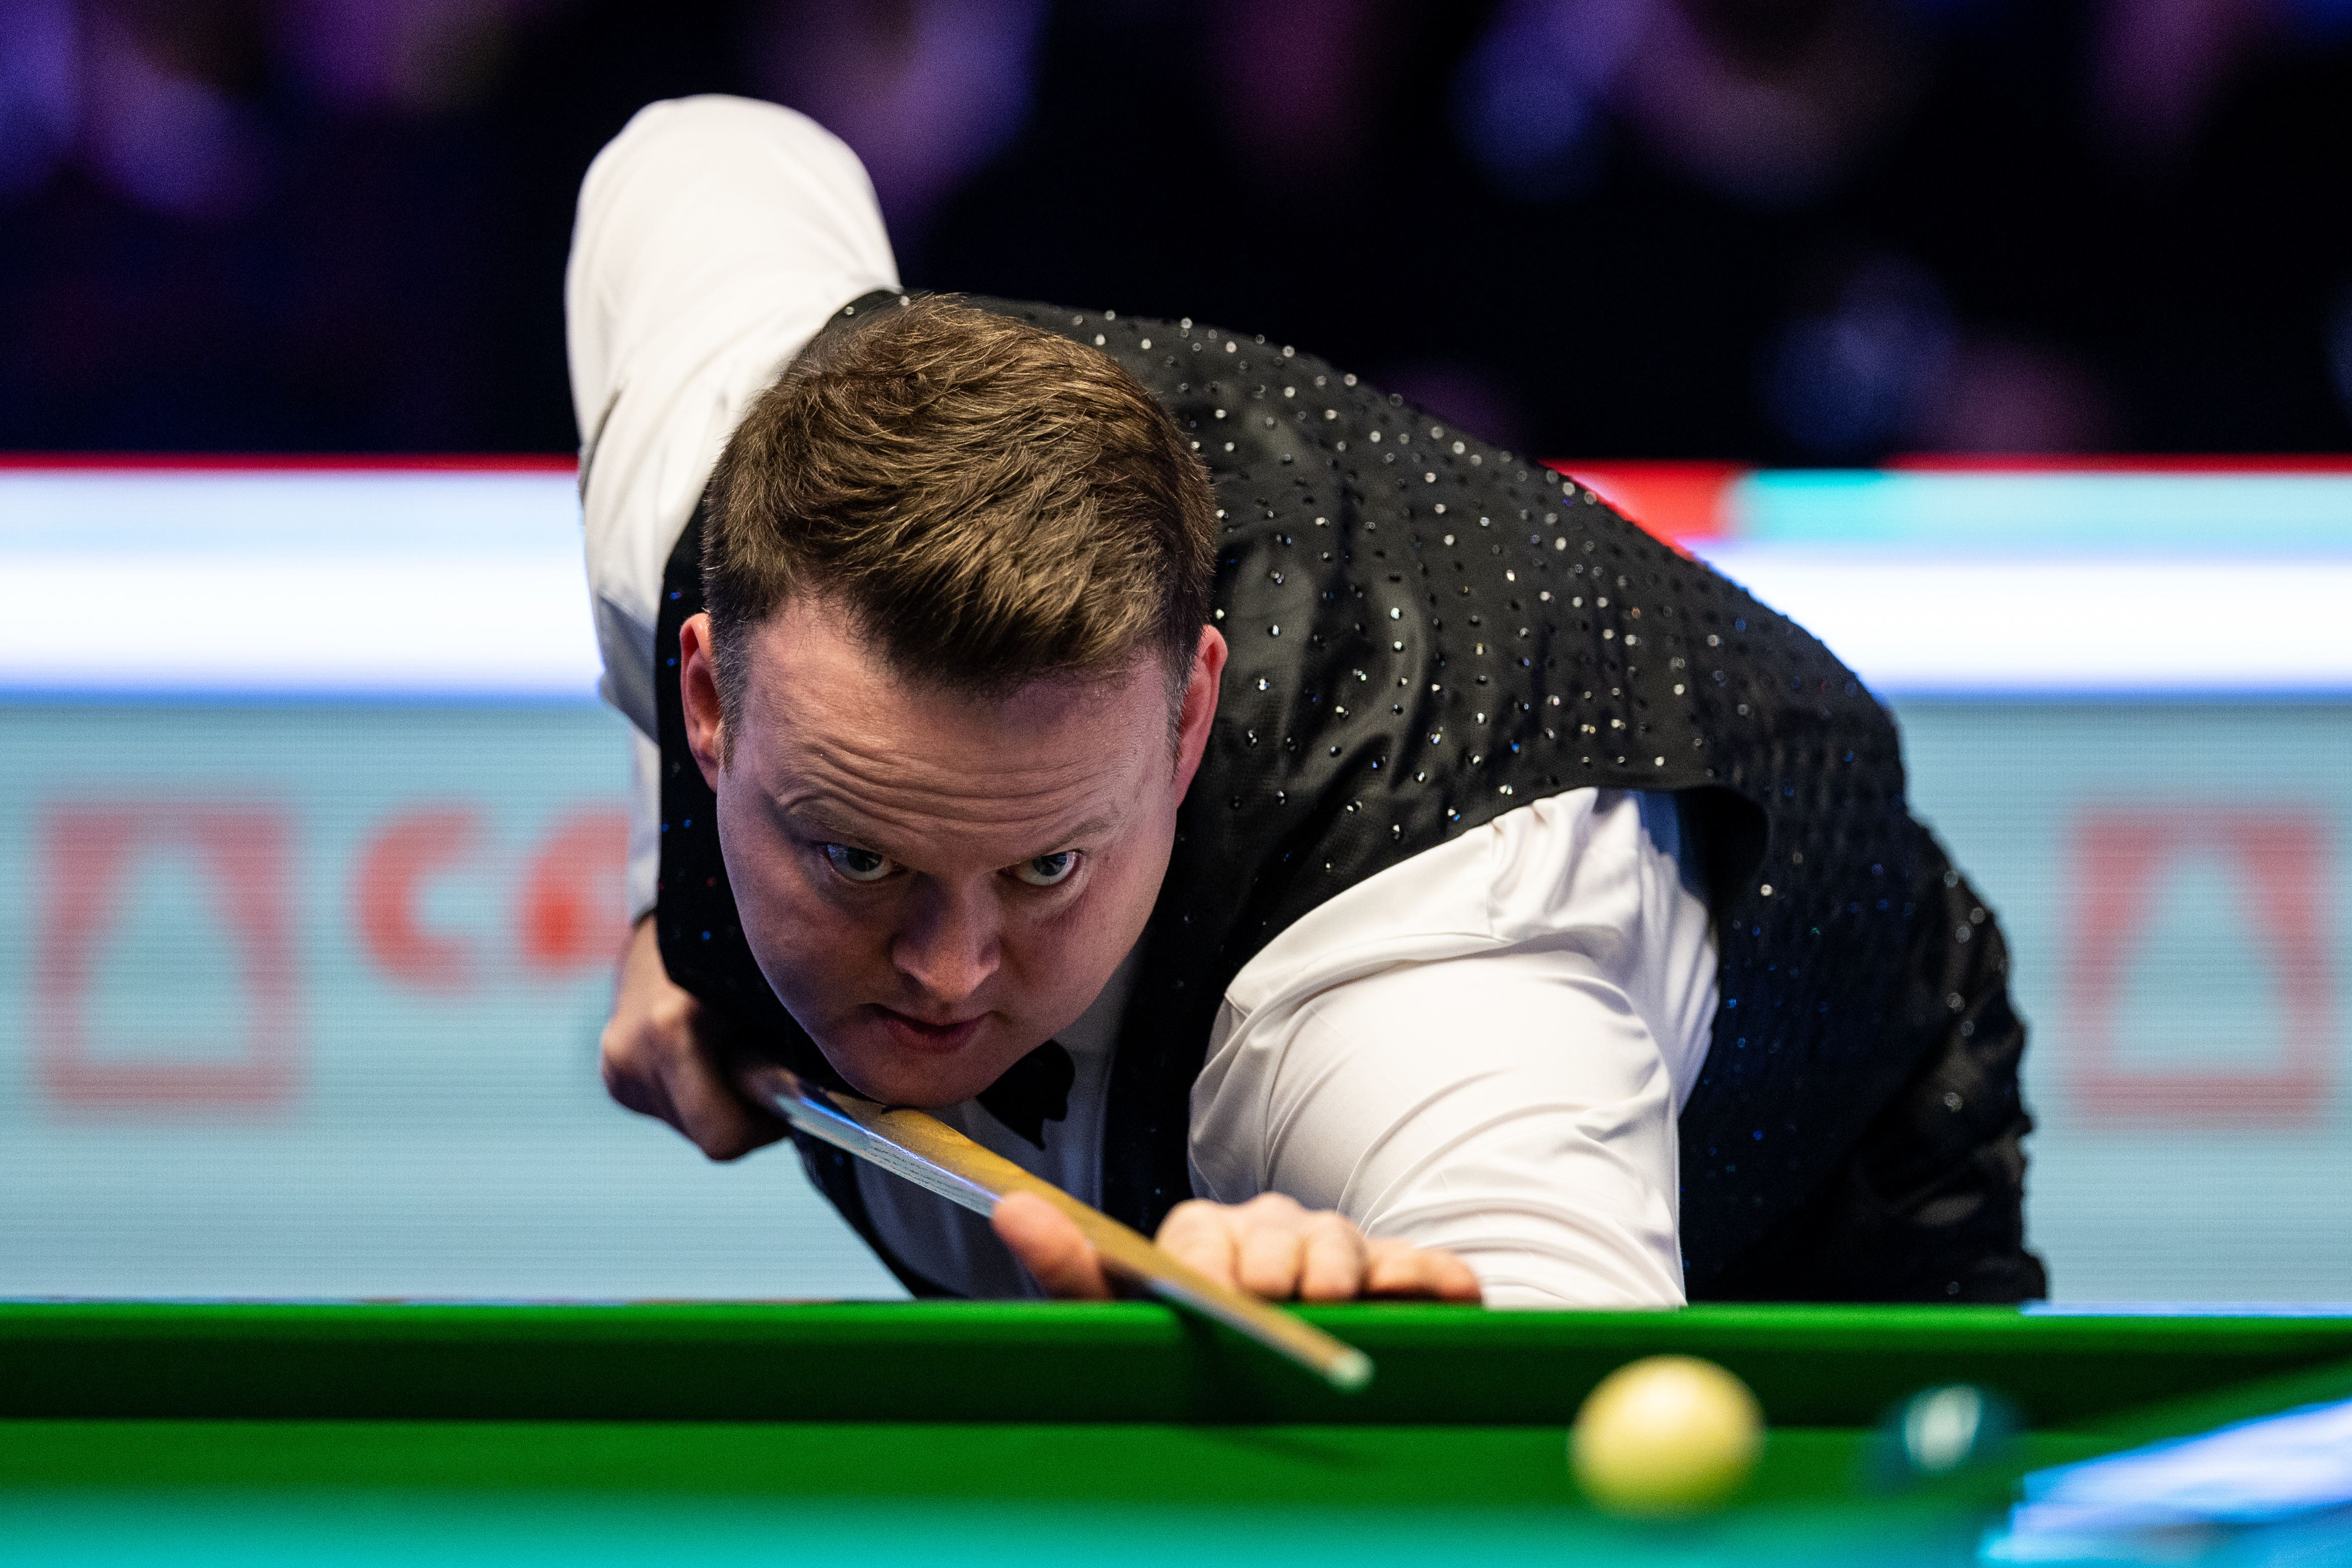 Shaun Murphy and Robert Milkins to clash in Welsh Open final The Independent